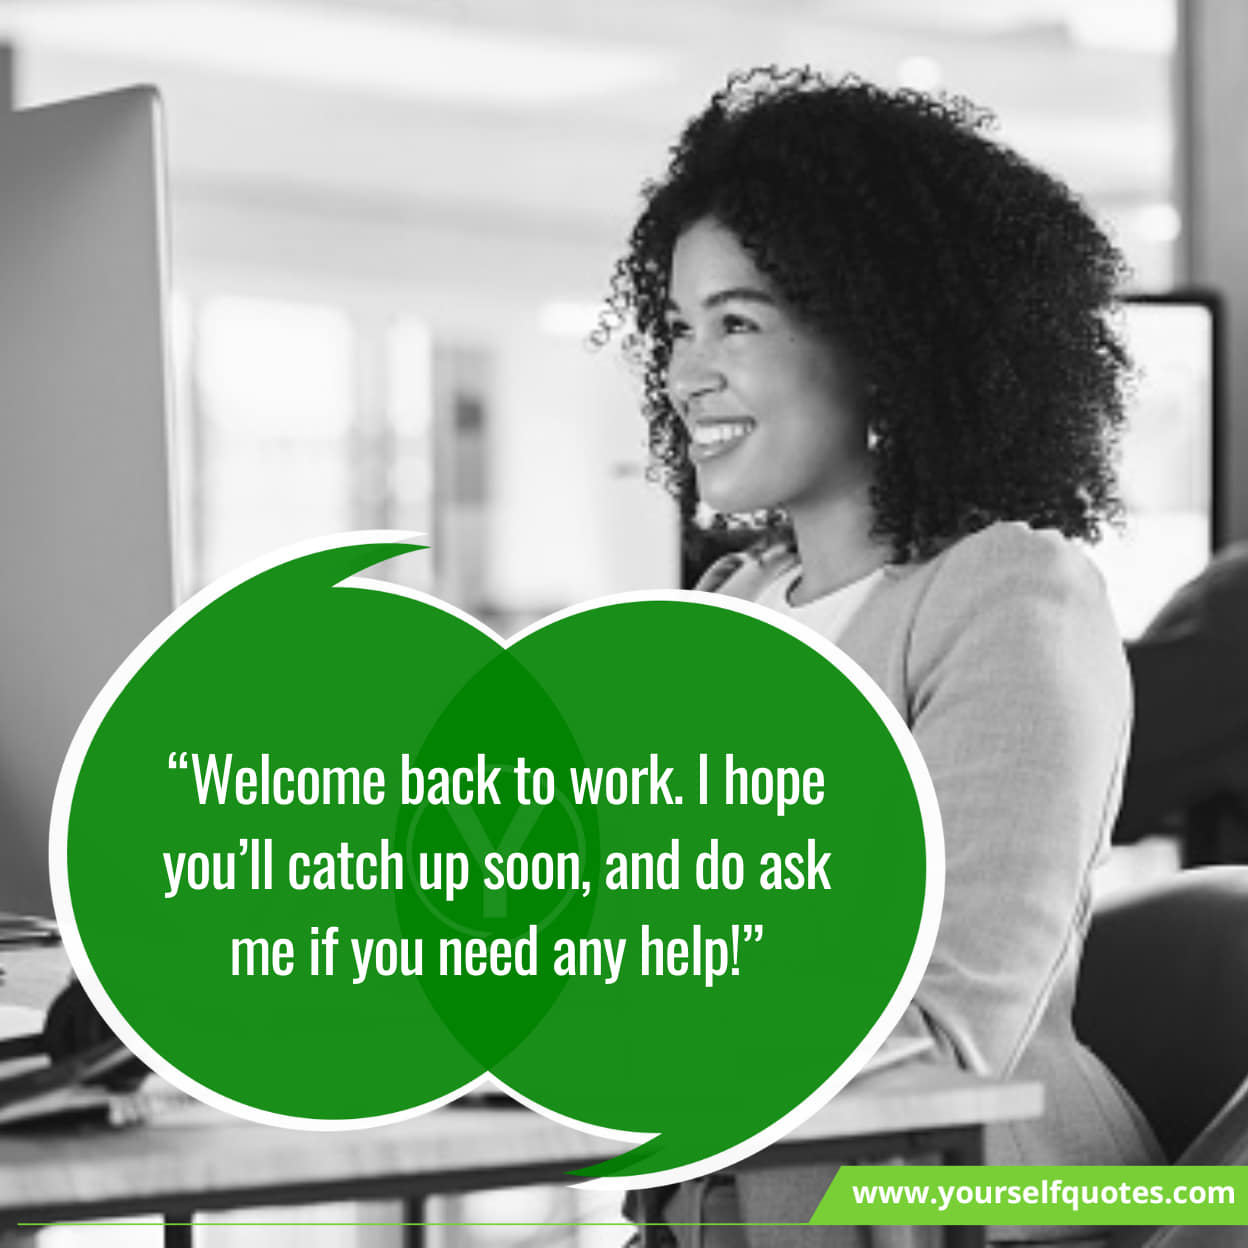 famous alluring back to work messages sayings quotes